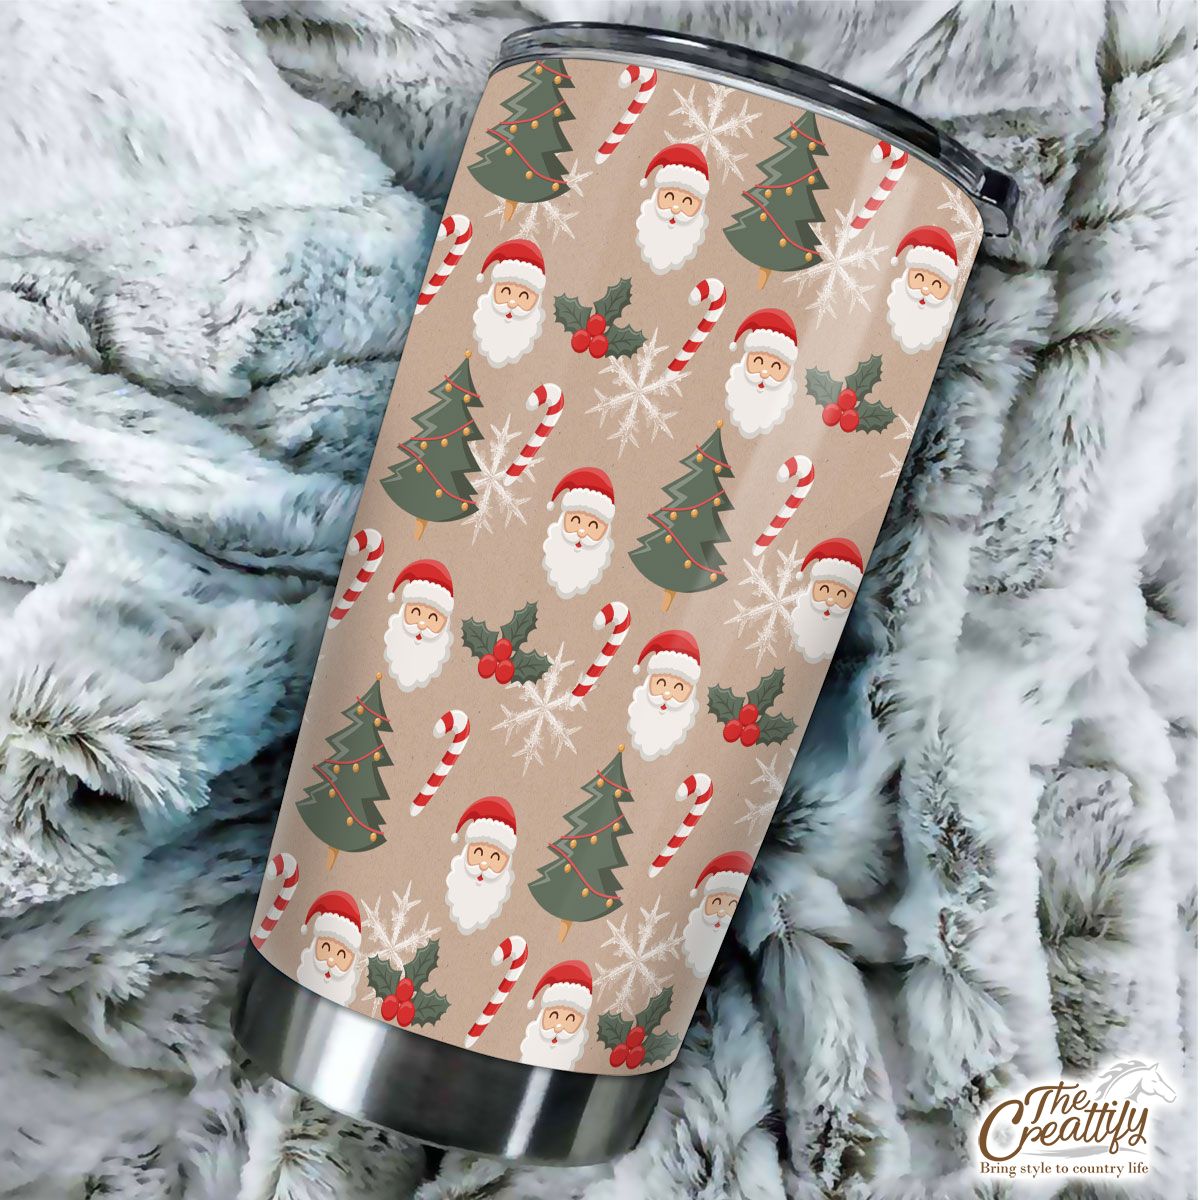 Santa Clause, Christmas Tree, Candy Cane, Holly Leaf On Snowflake Background Tumbler